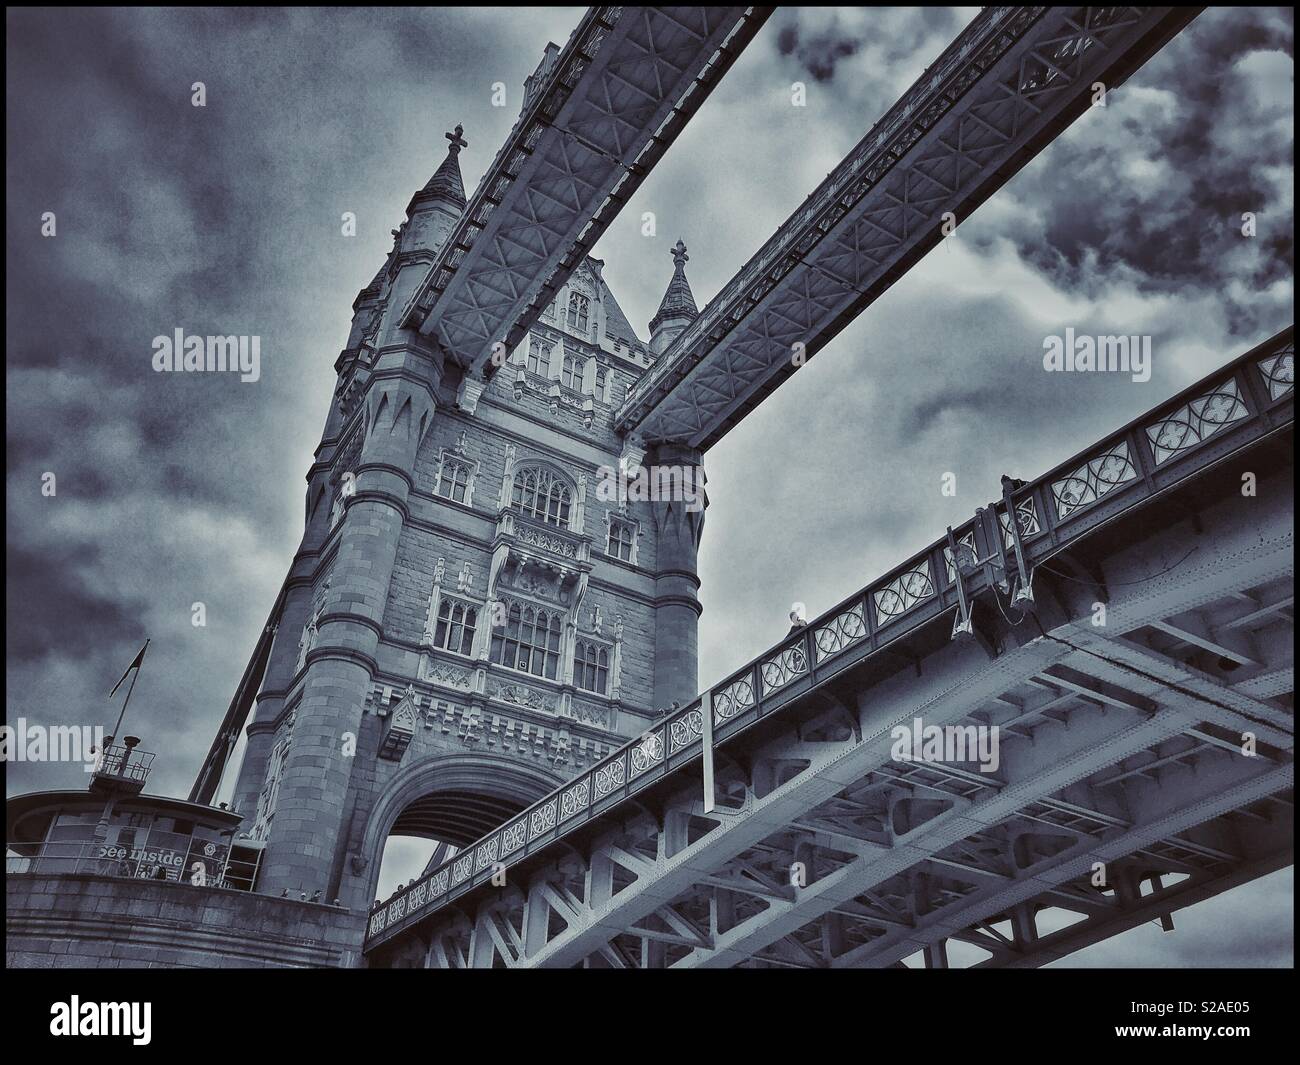 An unusual view of Tower Bridge - a view looking up from a boat on the River Thames. Tower Bridge is a Grade 1 Listed Building and a Tourist must see in London, England. Photo Credit © COLIN HOSKINS. Stock Photo